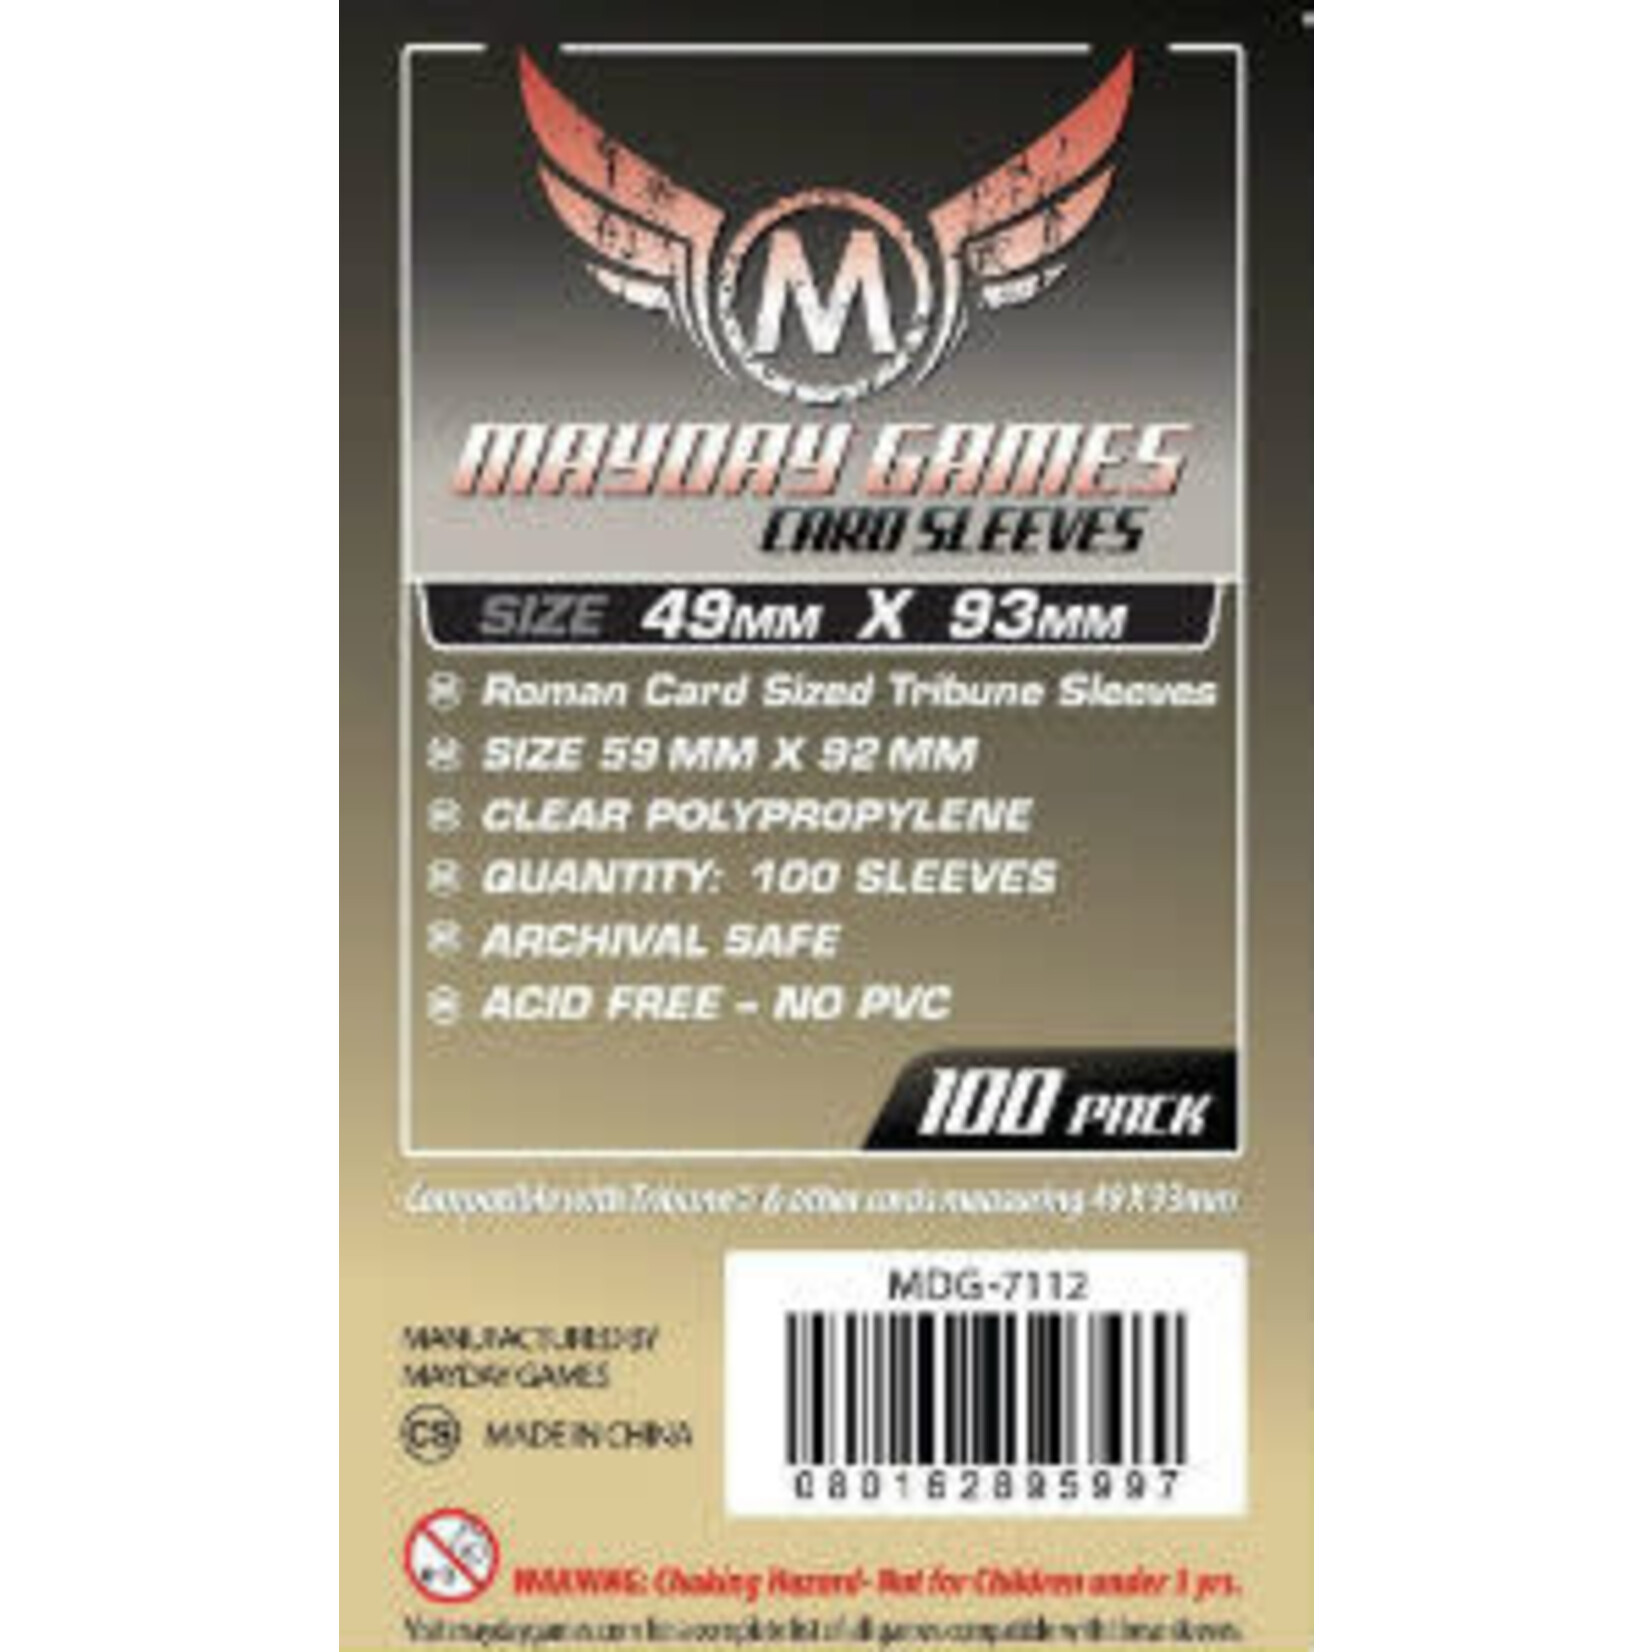 Mayday Games Roman sized Card Sleeves 49mm x 93mm